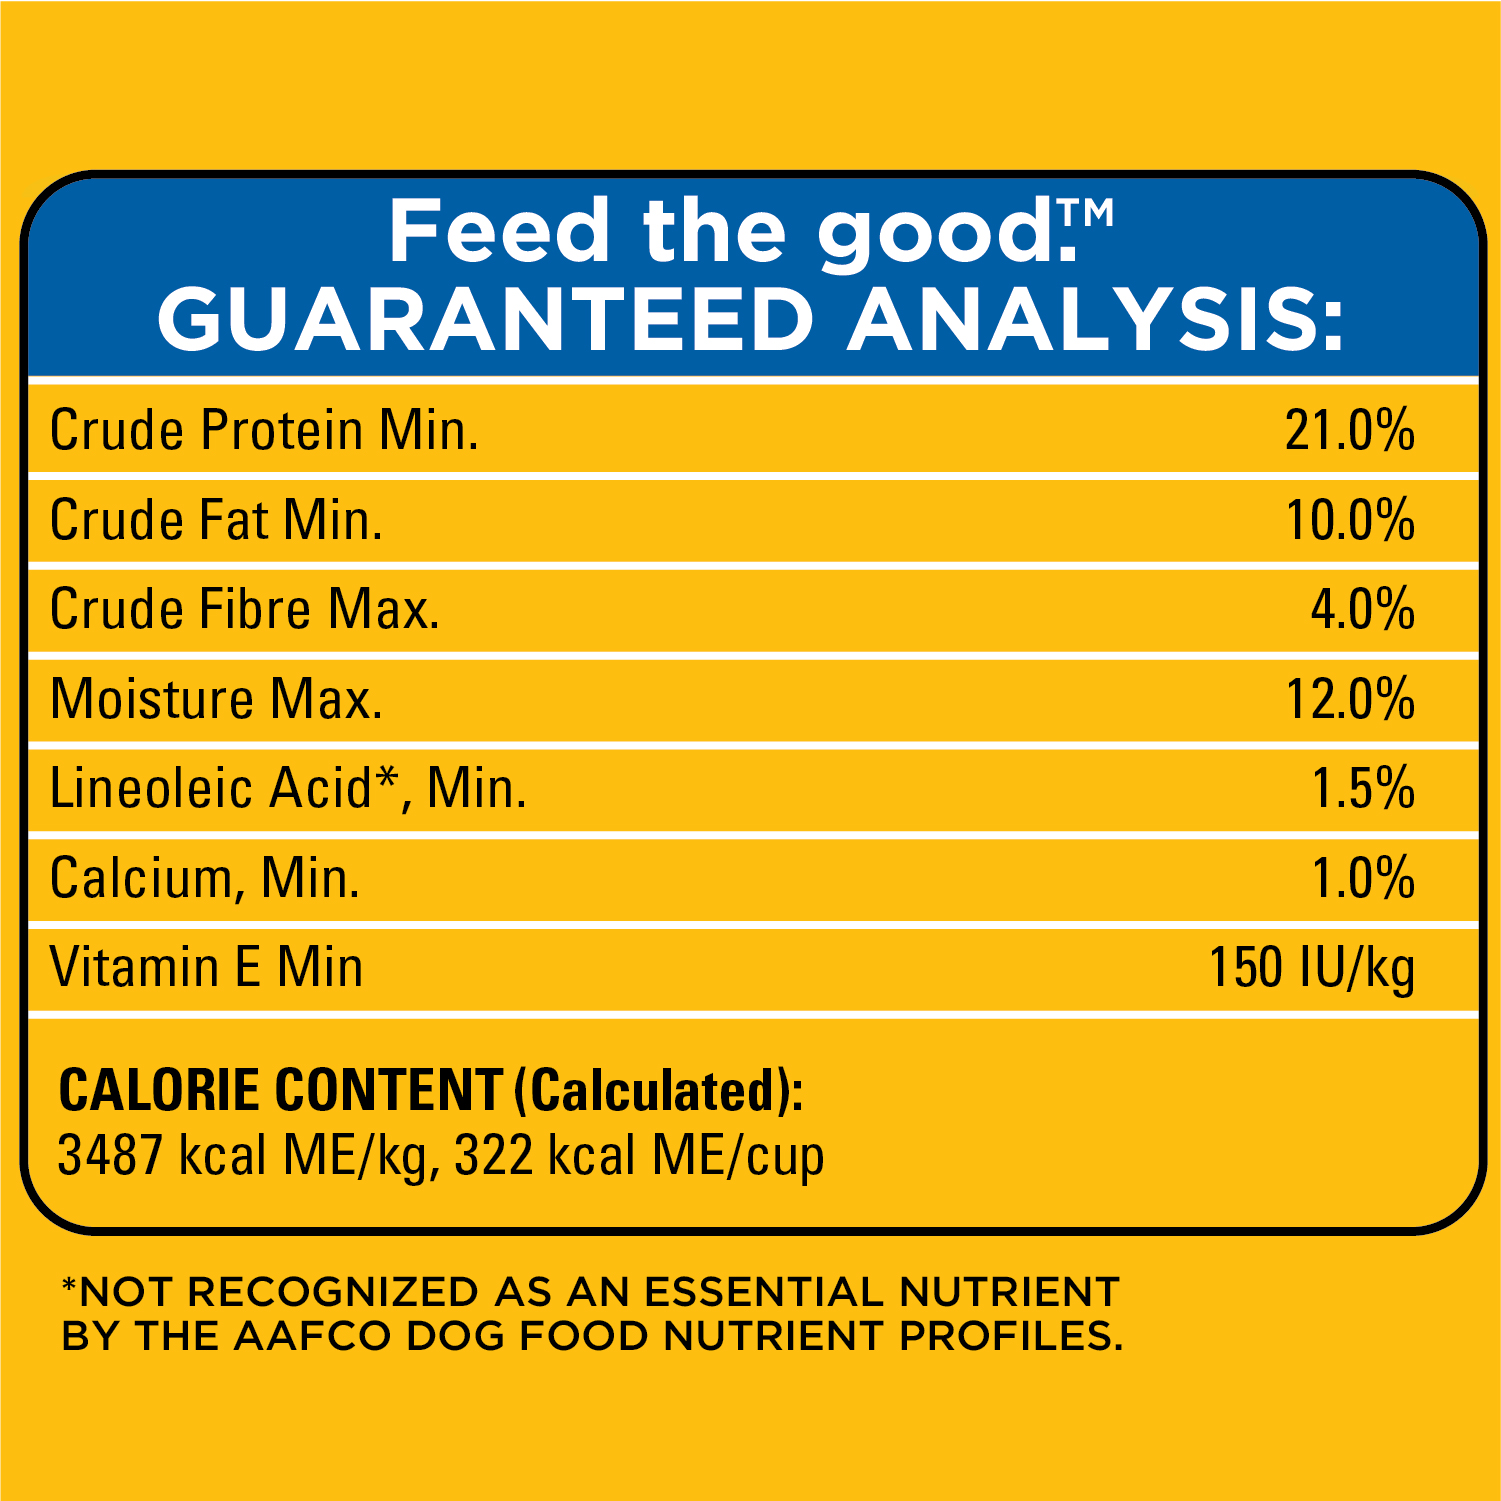 PEDIGREE® VITALITY+ ROASTED CHICKEN & VEGETABLE FLAVOUR DRY DOG FOOD guaranteed analysis image